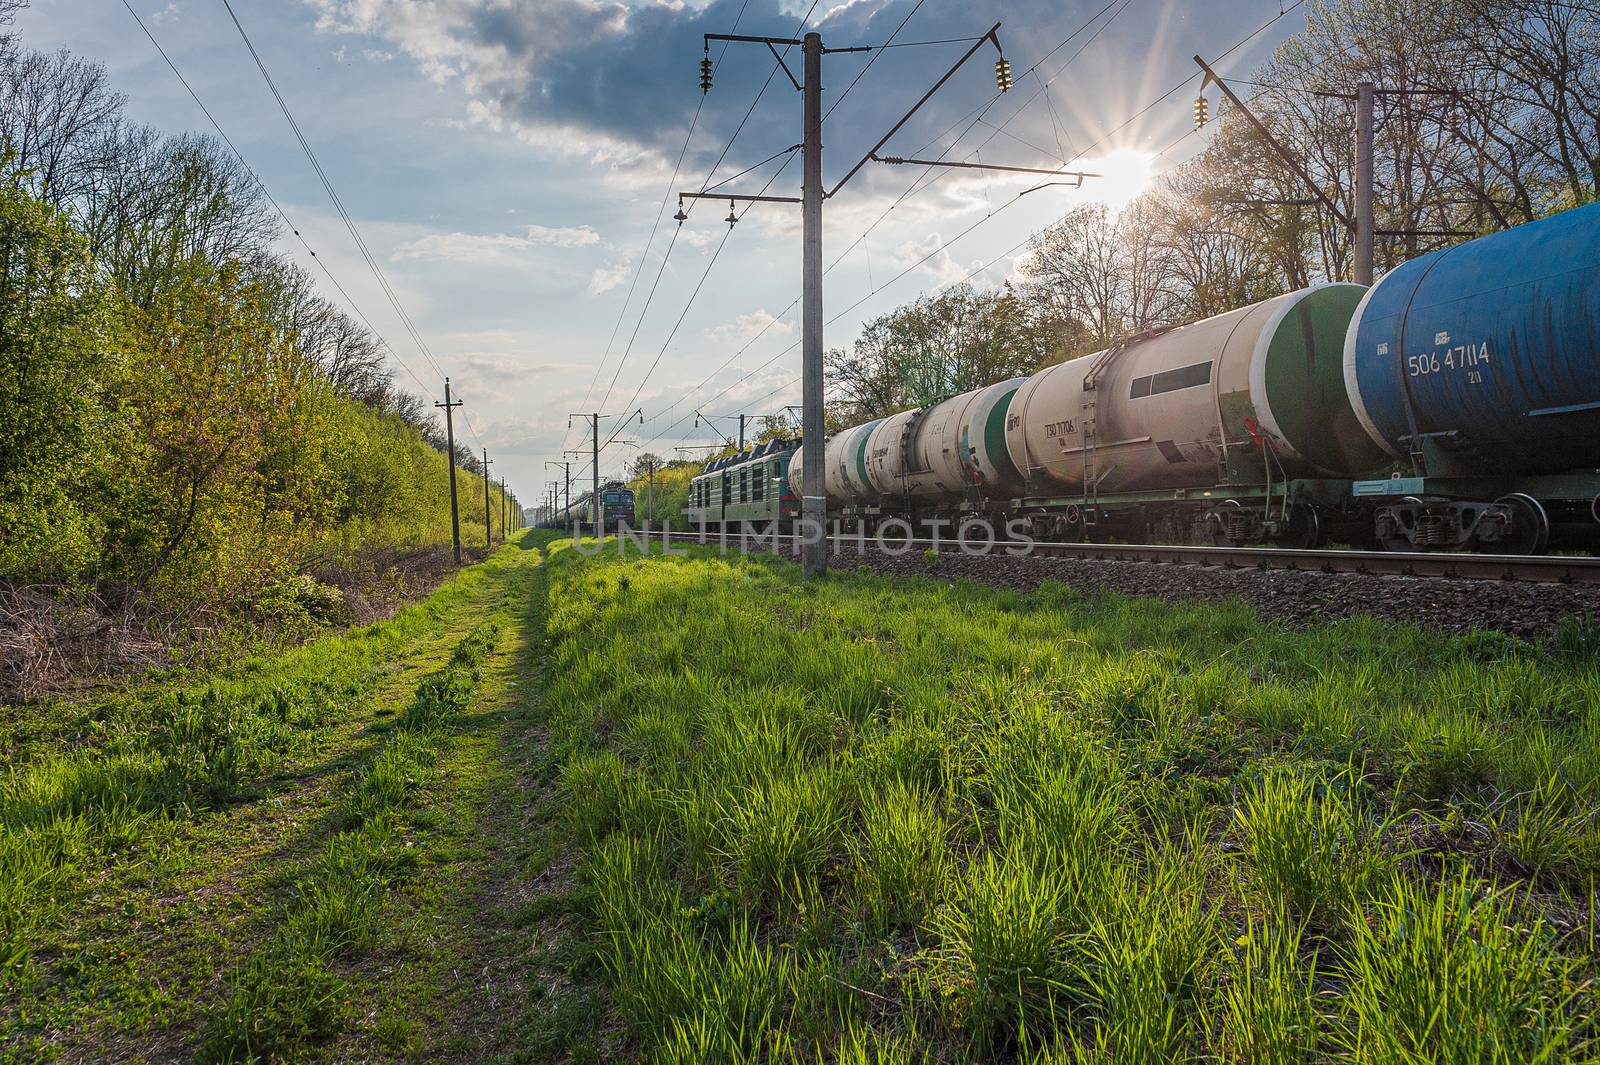 two trains with tank wagons move on railway tracks towards each other at sunset near green grass and trees by chernobrovin